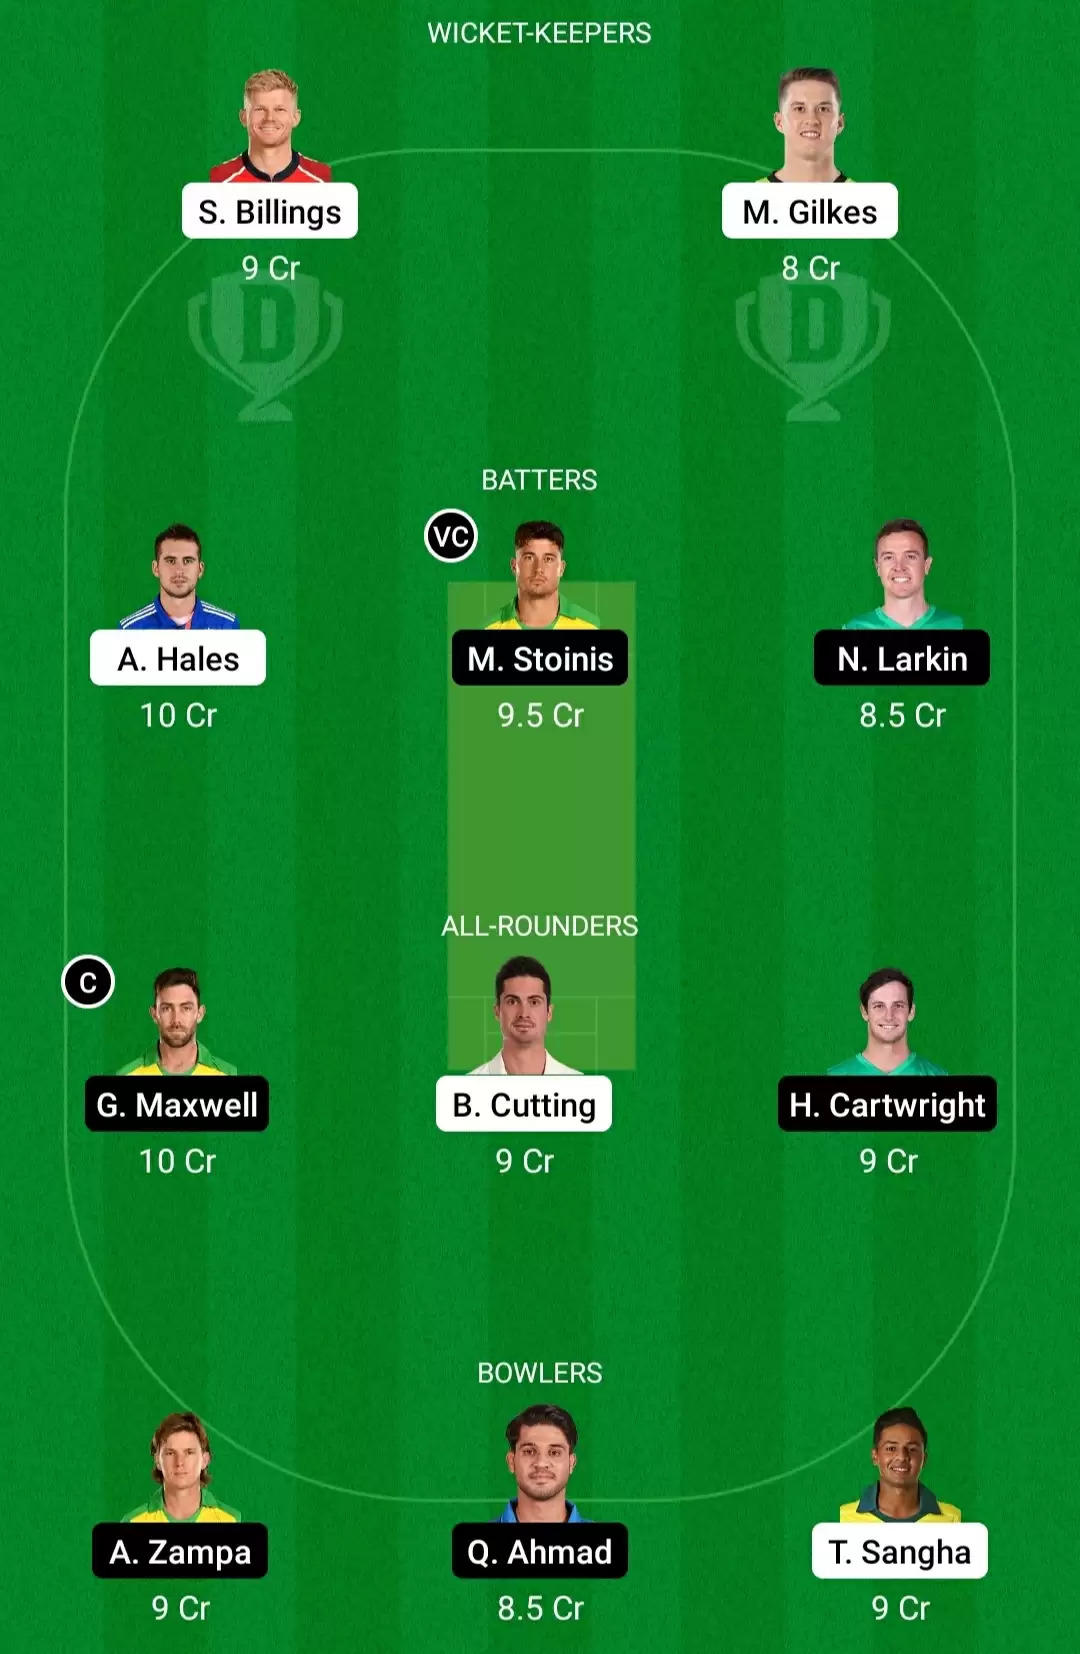 THU vs STA Dream11 Prediction, Big Bash League 2020-21, Match 10: Playing XI, Fantasy Cricket Tips, Team, Weather Updates and Pitch Report